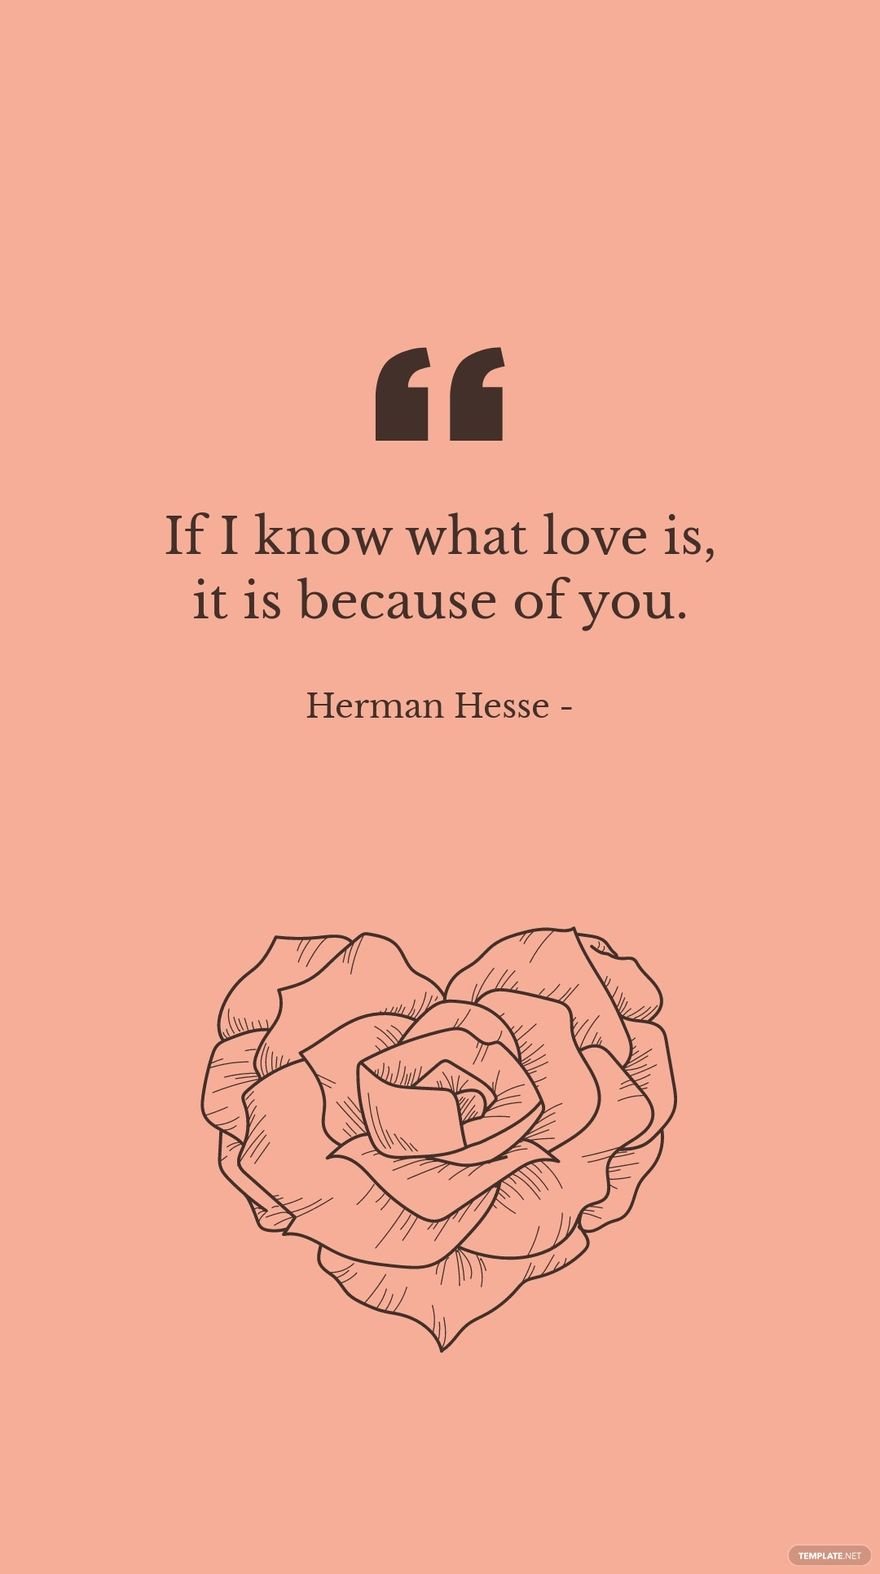 Herman Hesse - If I know what love is, it is because of you. in JPG